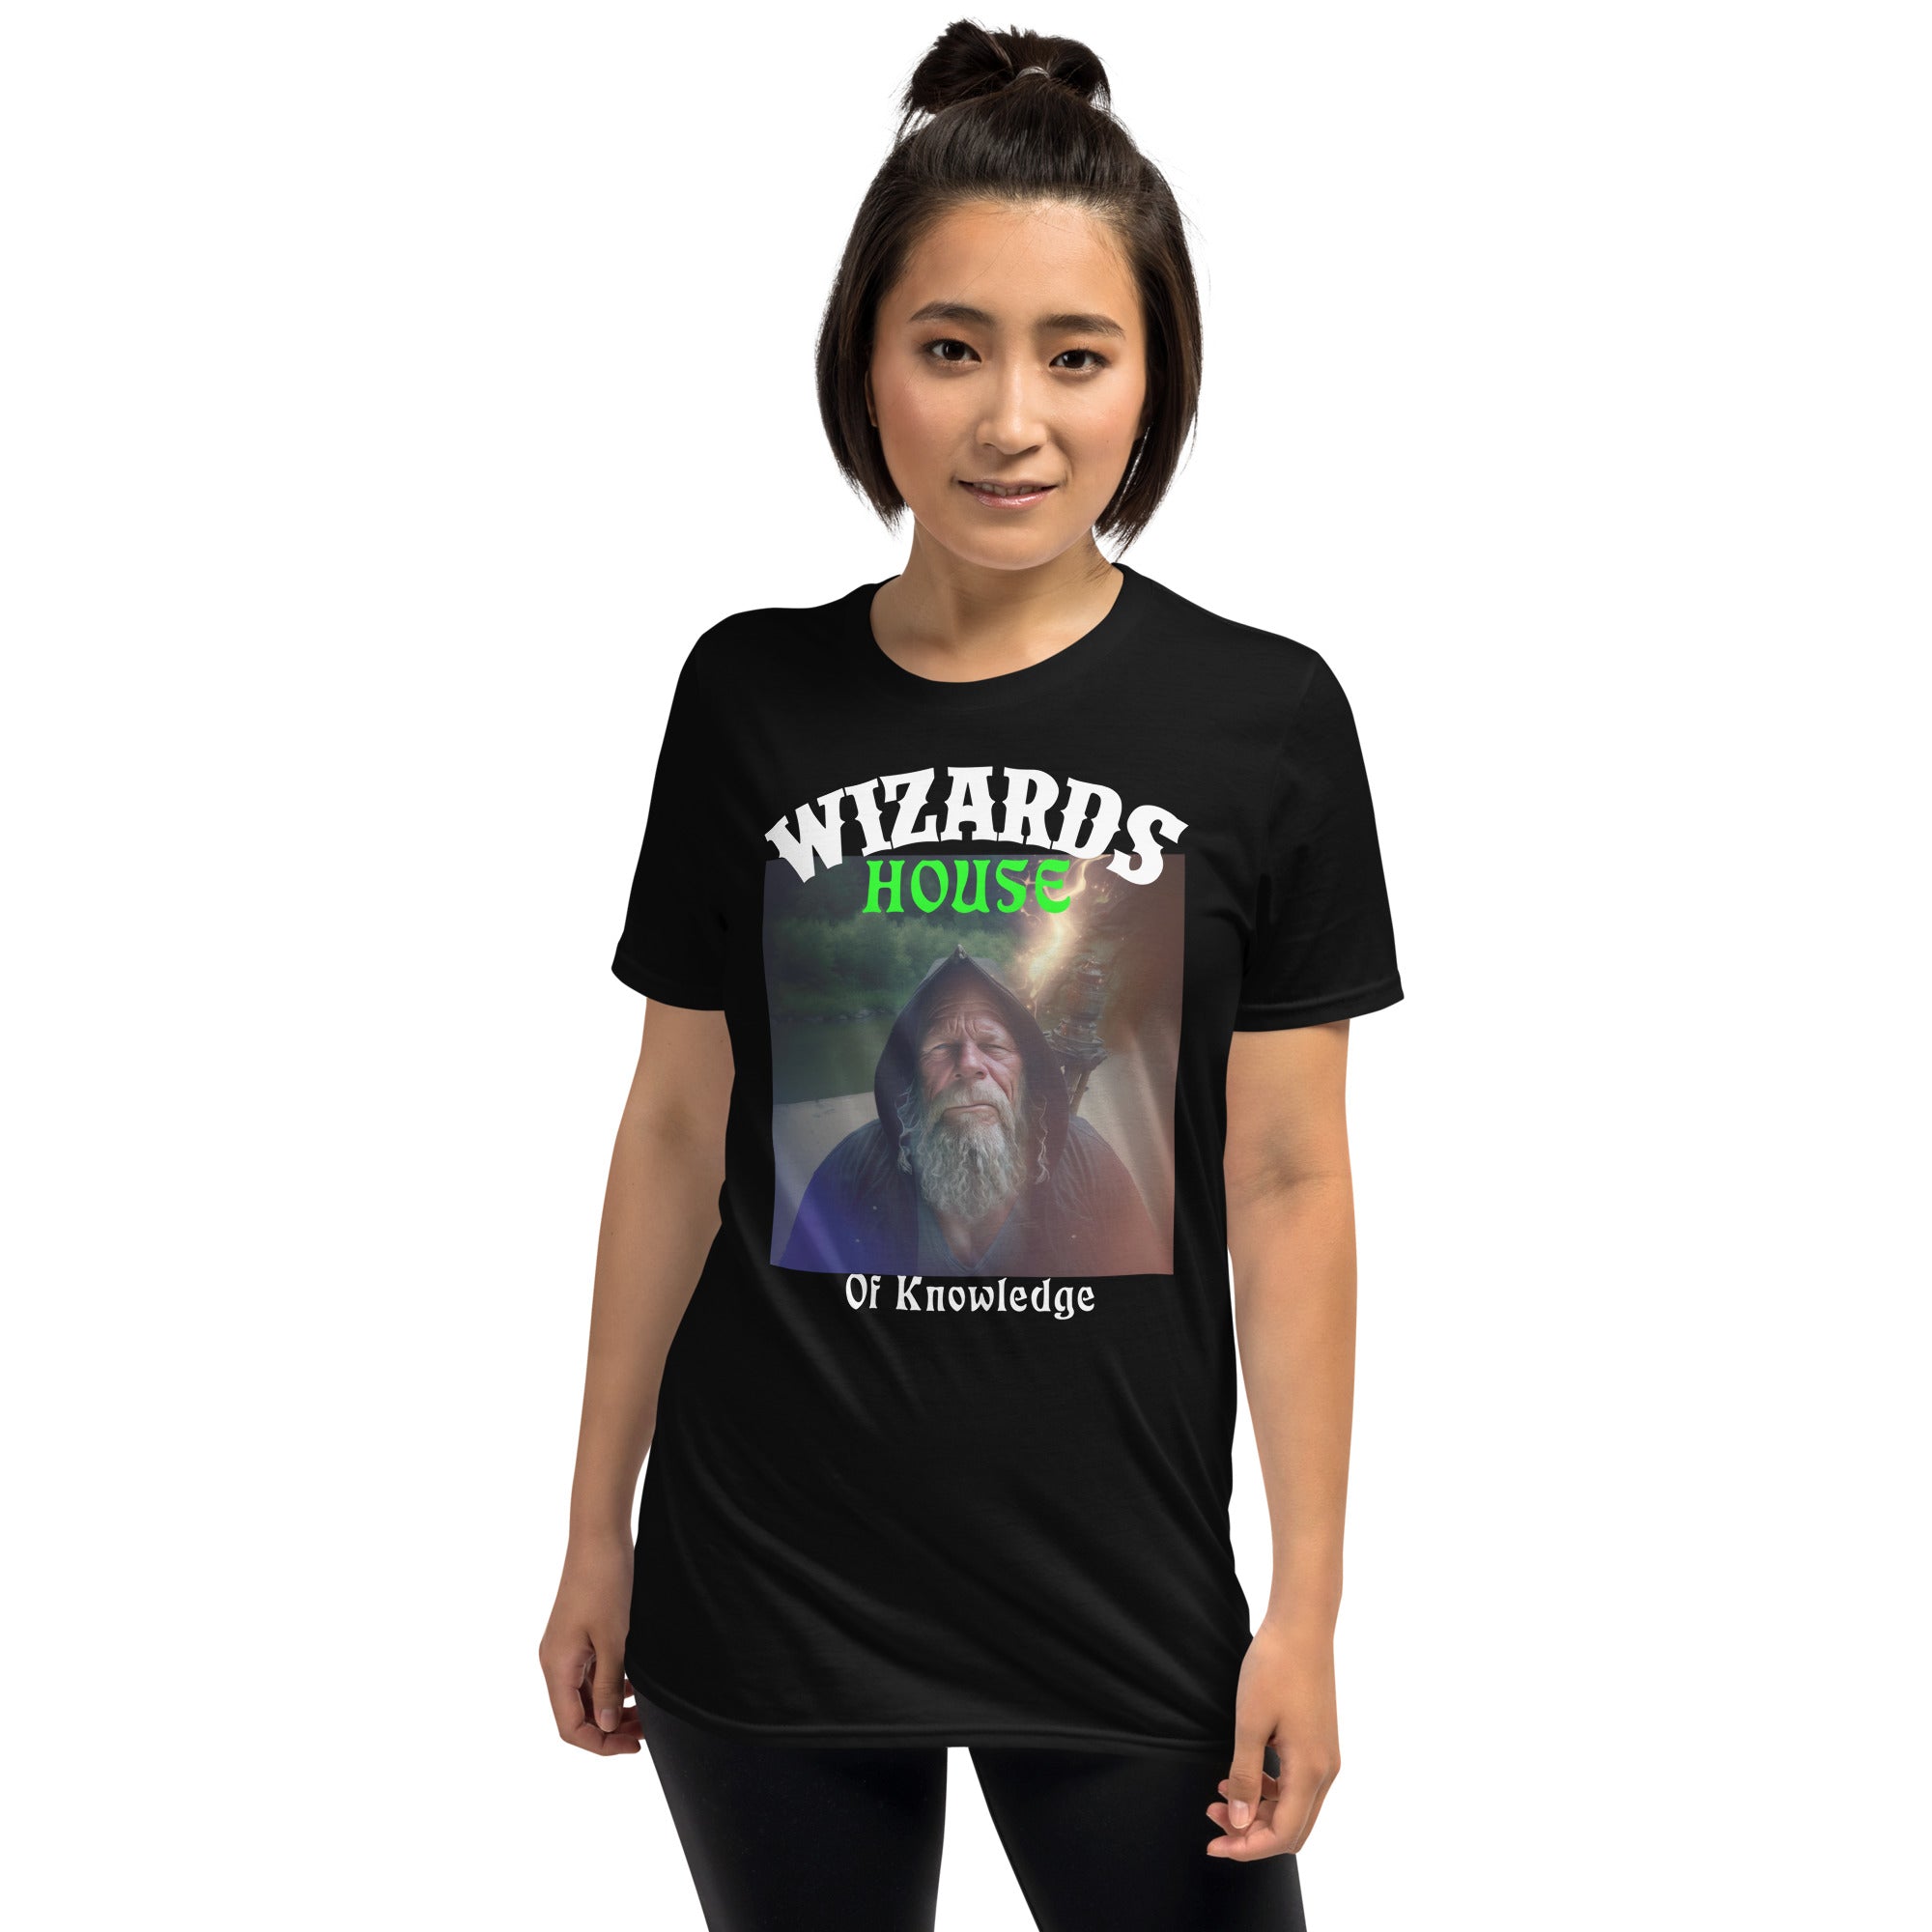 Wizards House of Knowledge Unisex T-Shirt